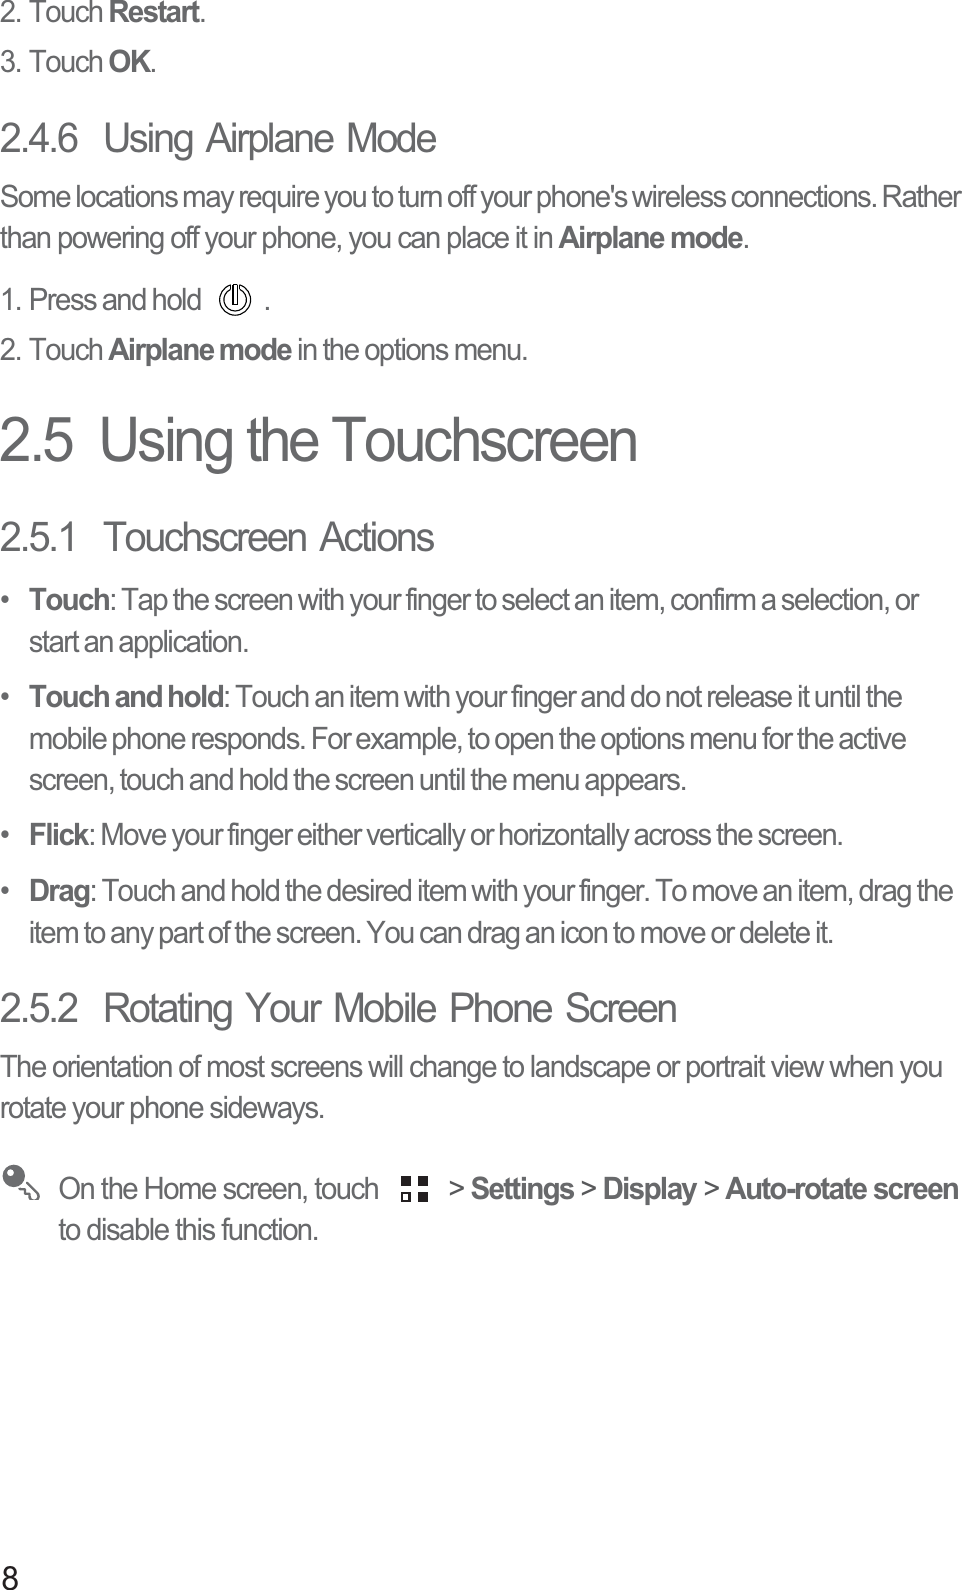 82. Touch Restart.3. Touch OK.2.4.6  Using Airplane ModeSome locations may require you to turn off your phone&apos;s wireless connections. Rather than powering off your phone, you can place it in Airplane mode.1. Press and hold  .2. Touch Airplane mode in the options menu.2.5  Using the Touchscreen2.5.1  Touchscreen Actions•  Touch: Tap the screen with your finger to select an item, confirm a selection, or start an application.•  Touch and hold: Touch an item with your finger and do not release it until the mobile phone responds. For example, to open the options menu for the active screen, touch and hold the screen until the menu appears.•  Flick: Move your finger either vertically or horizontally across the screen.•  Drag: Touch and hold the desired item with your finger. To move an item, drag the item to any part of the screen. You can drag an icon to move or delete it.2.5.2  Rotating Your Mobile Phone ScreenThe orientation of most screens will change to landscape or portrait view when you rotate your phone sideways. On the Home screen, touch   &gt; Settings &gt; Display &gt; Auto-rotate screen to disable this function.